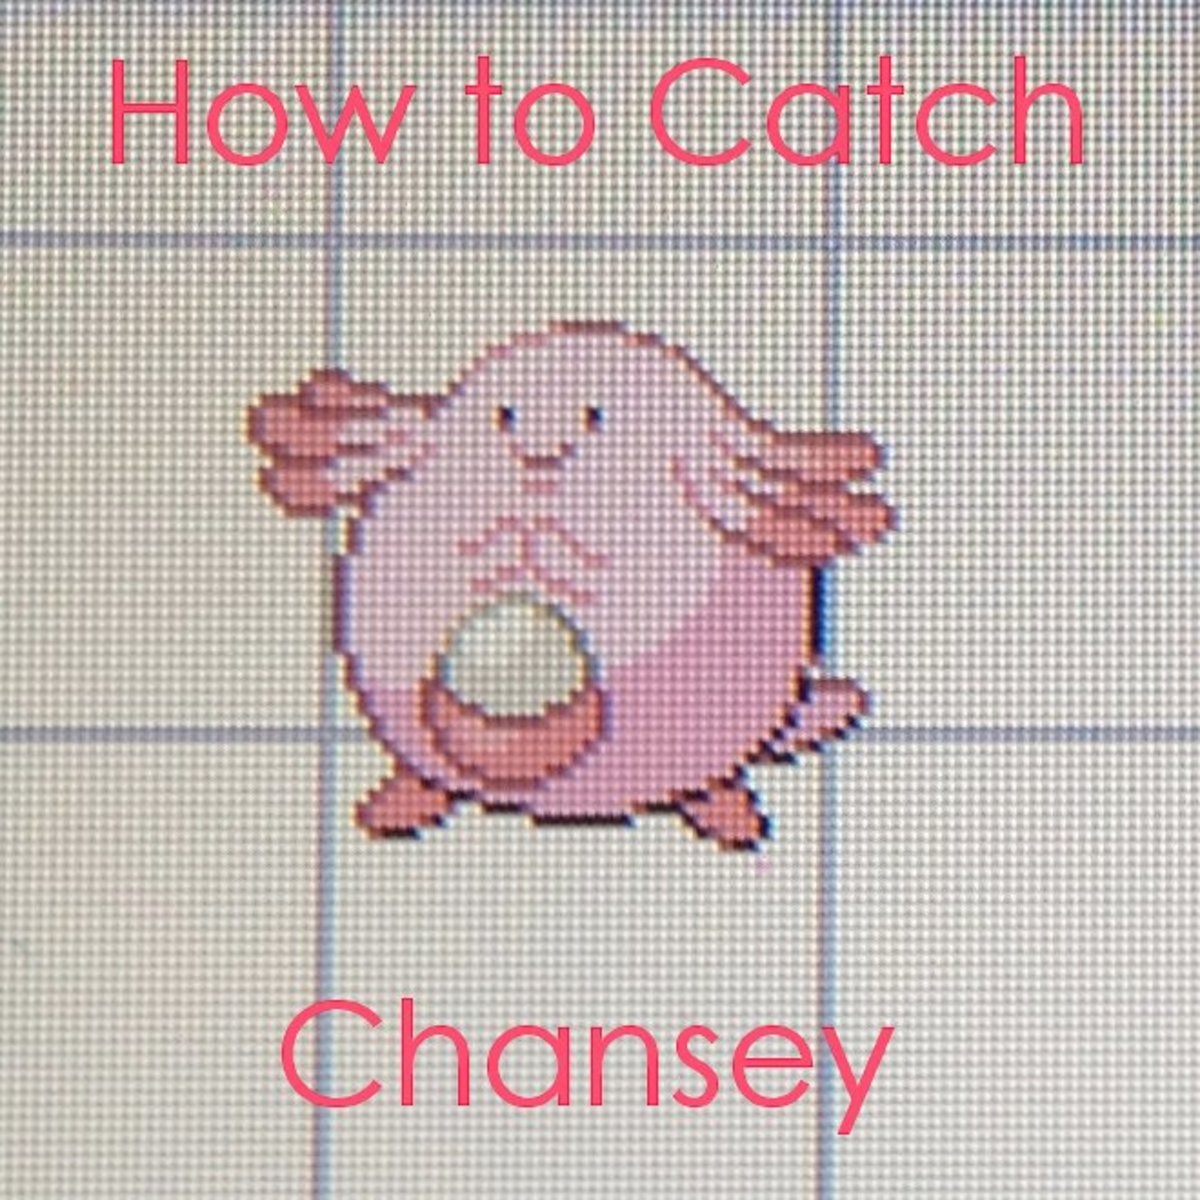 Learn where to find Chansey, as well as how to catch her and why she so valuable!